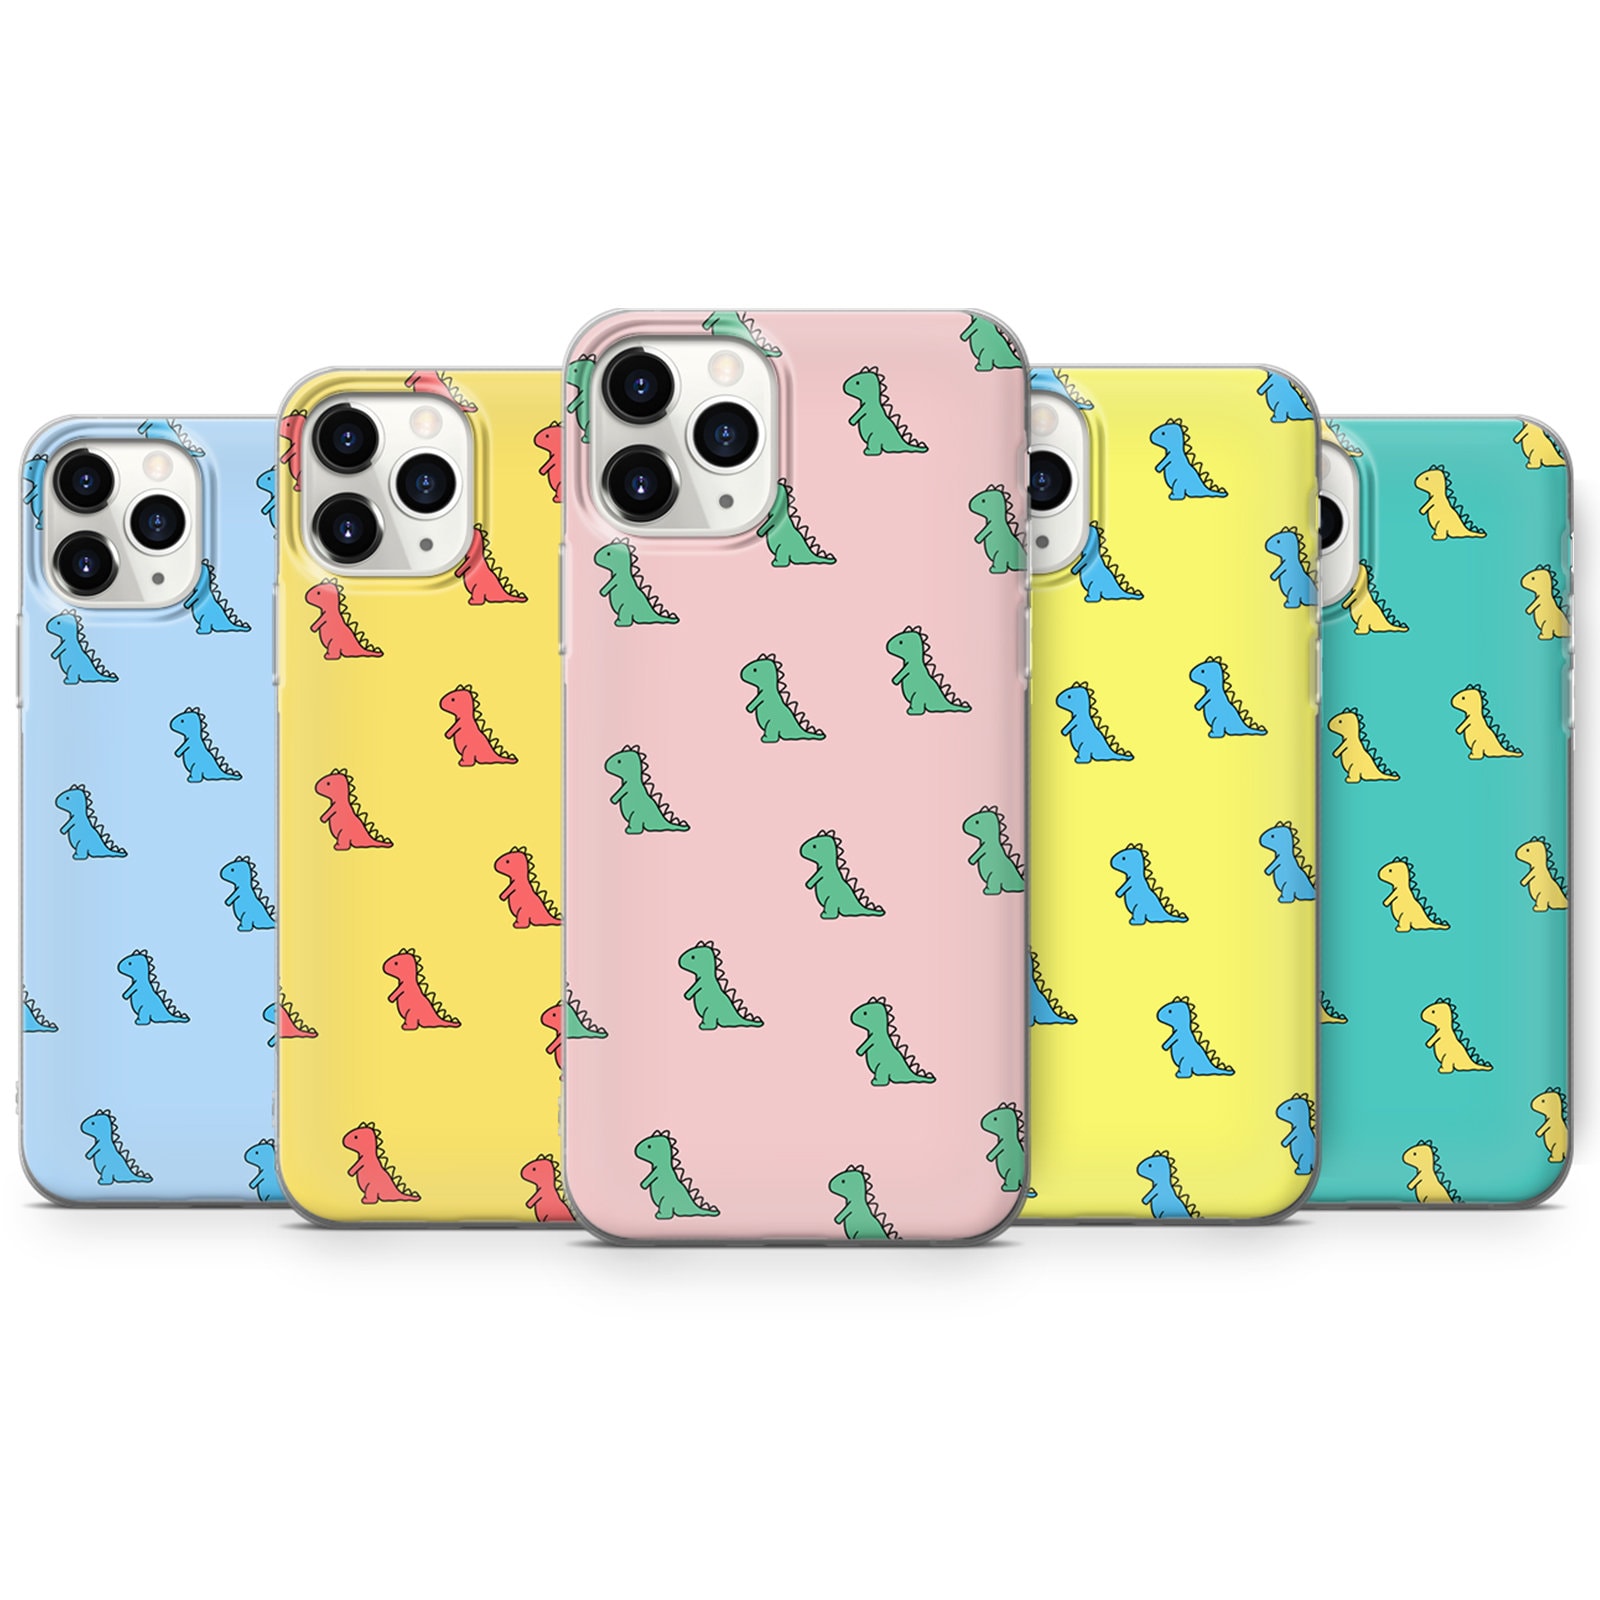 Cute Dinosaur Airpods Protector Case For Iphone – ivybycrafts